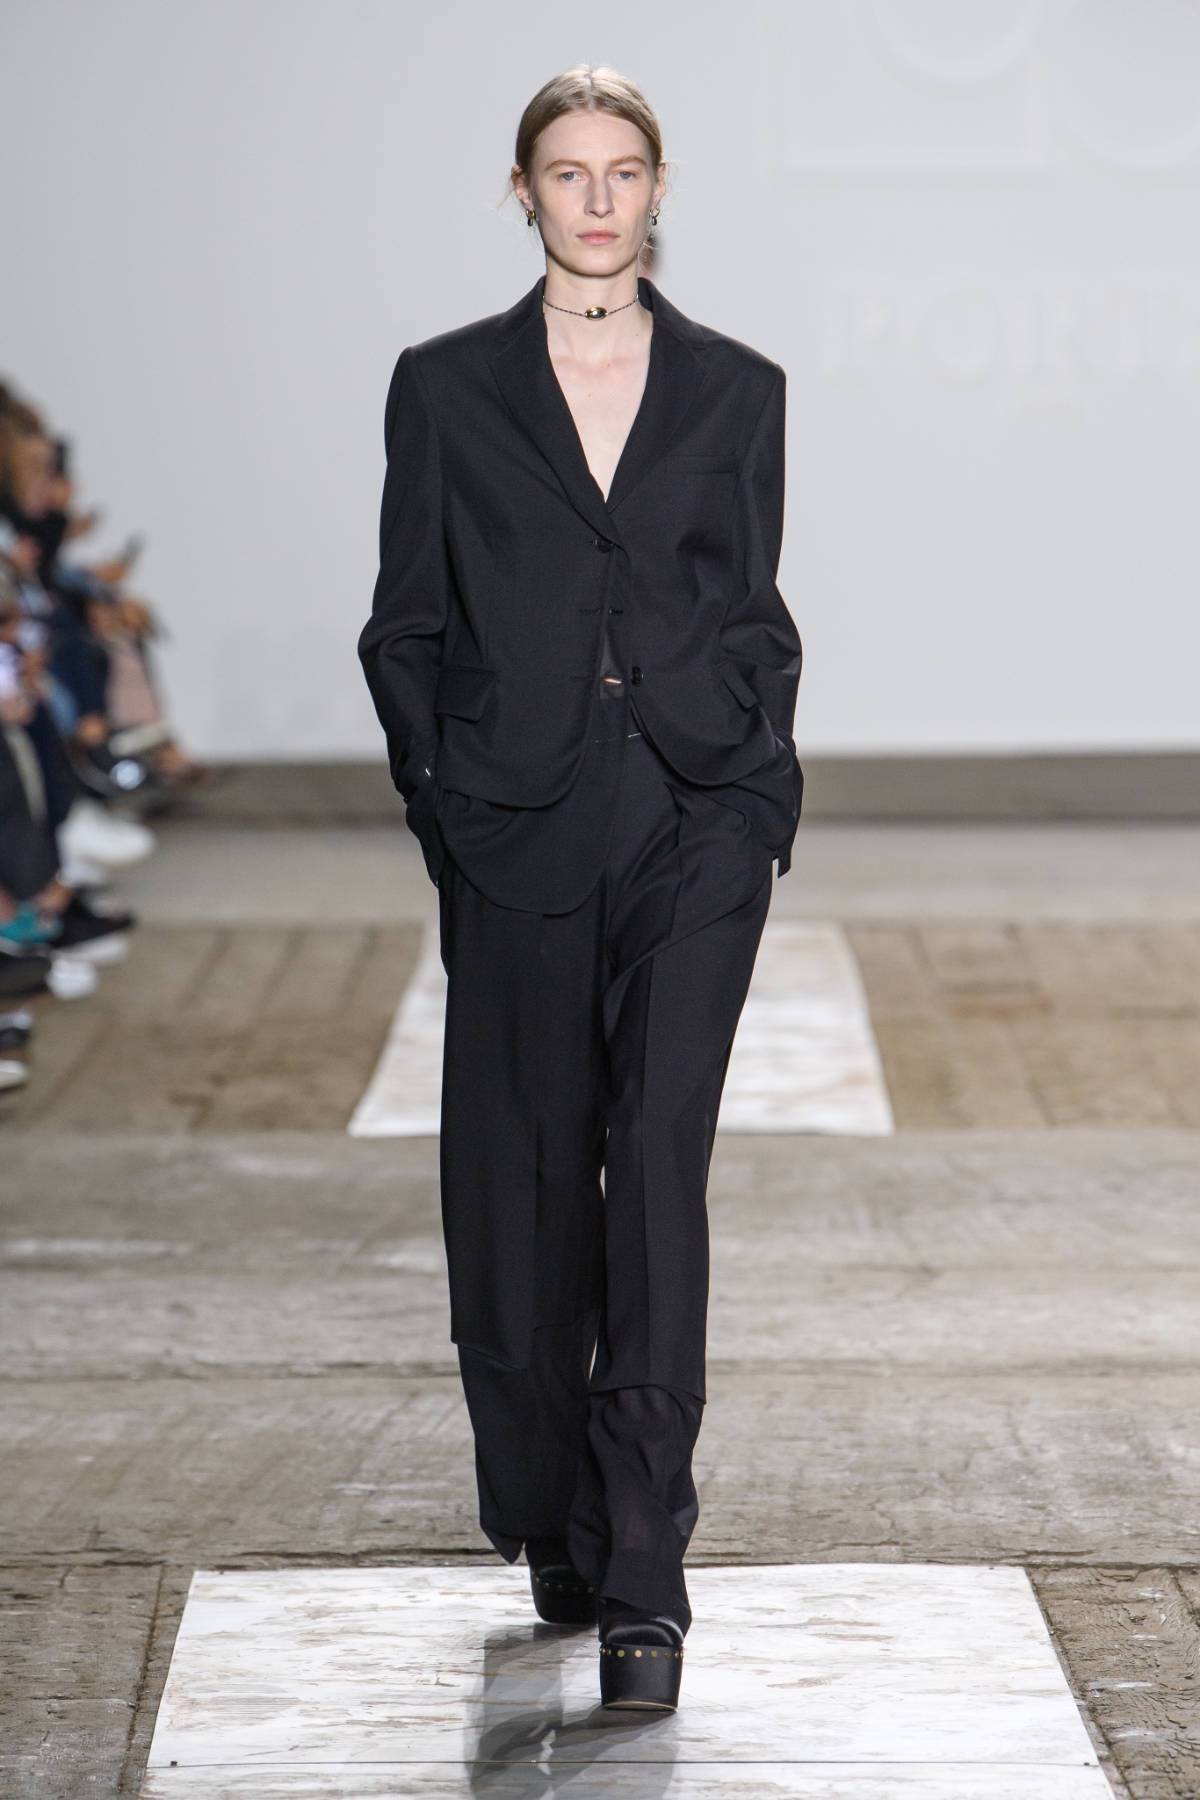 PORTS 1961 Presents Its New Spring-Summer 2023 Collection